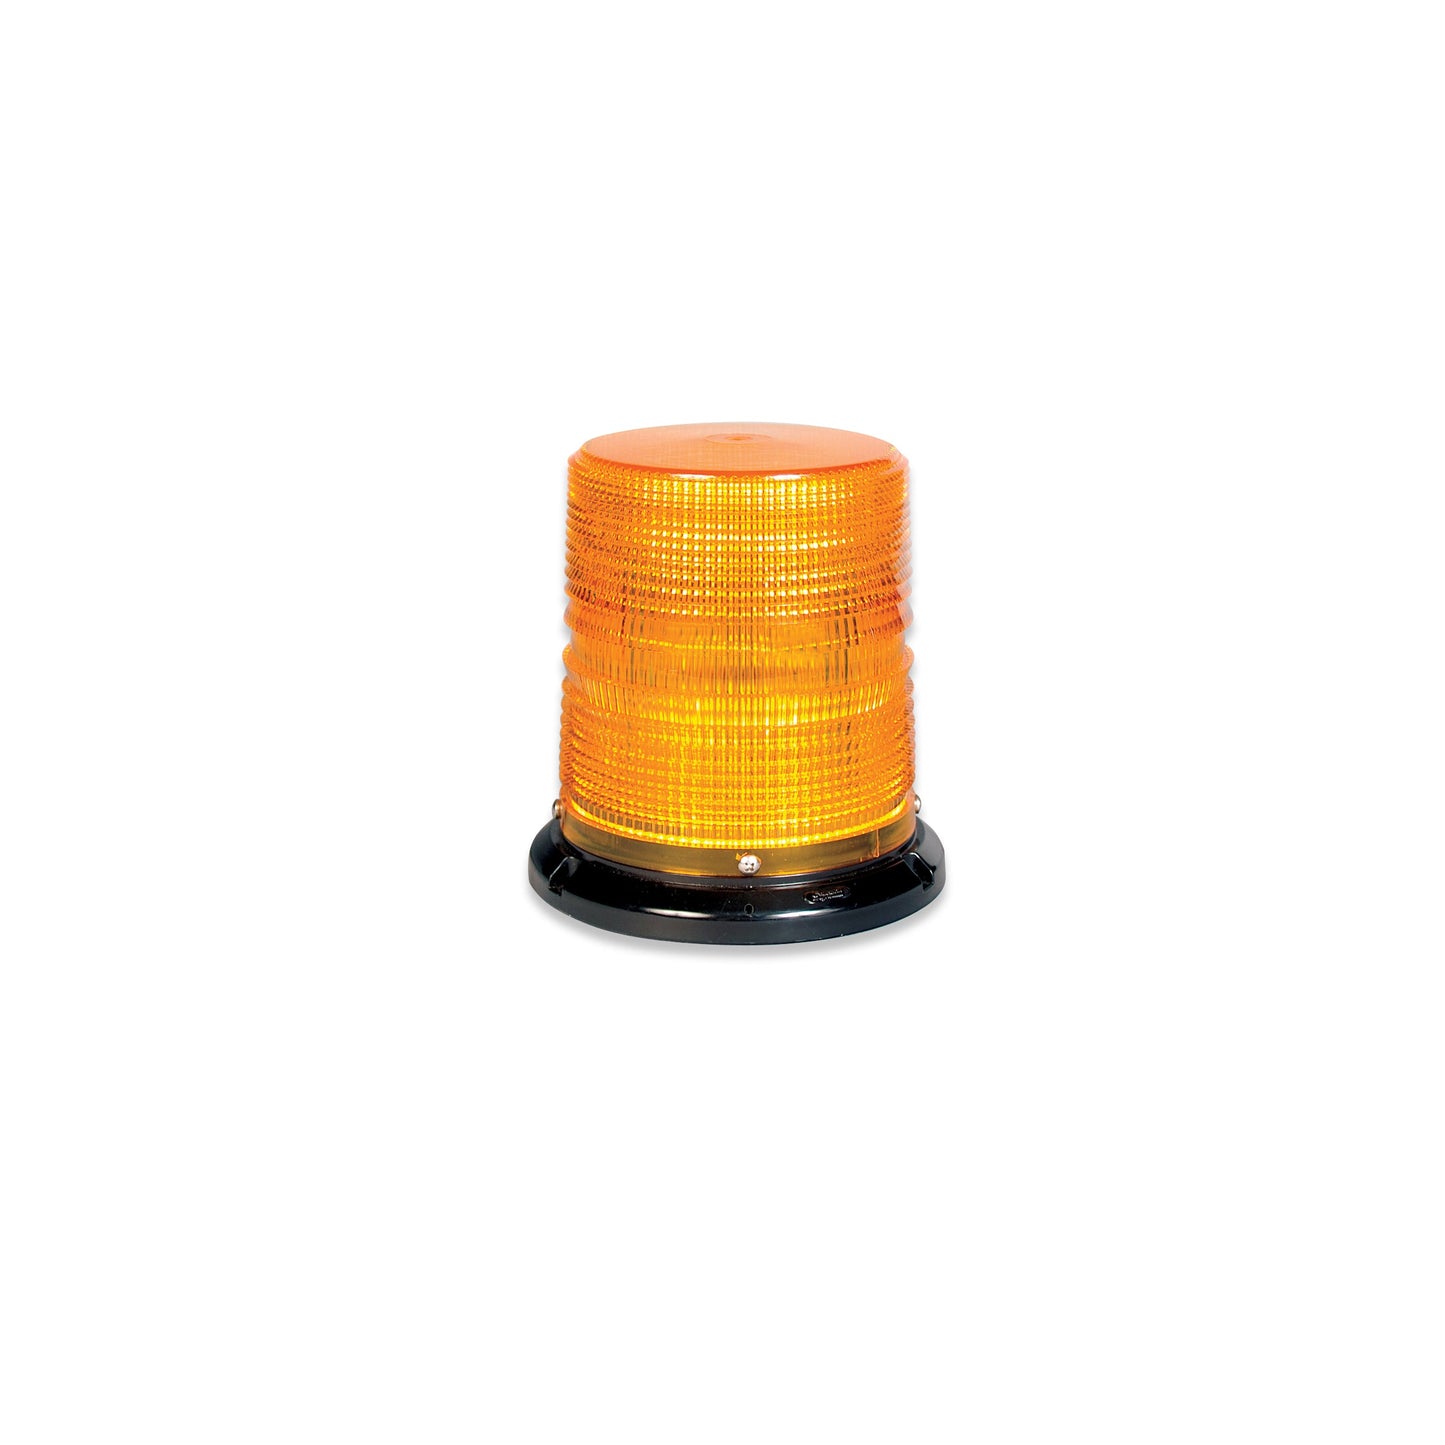 Soundoff Signal ELB45BMH+AC 4500 Series Led Beacon, 10-30V, Sae J845 Class 1 - Magnetic Mount, 6" Clear Dome/ Amber Leds